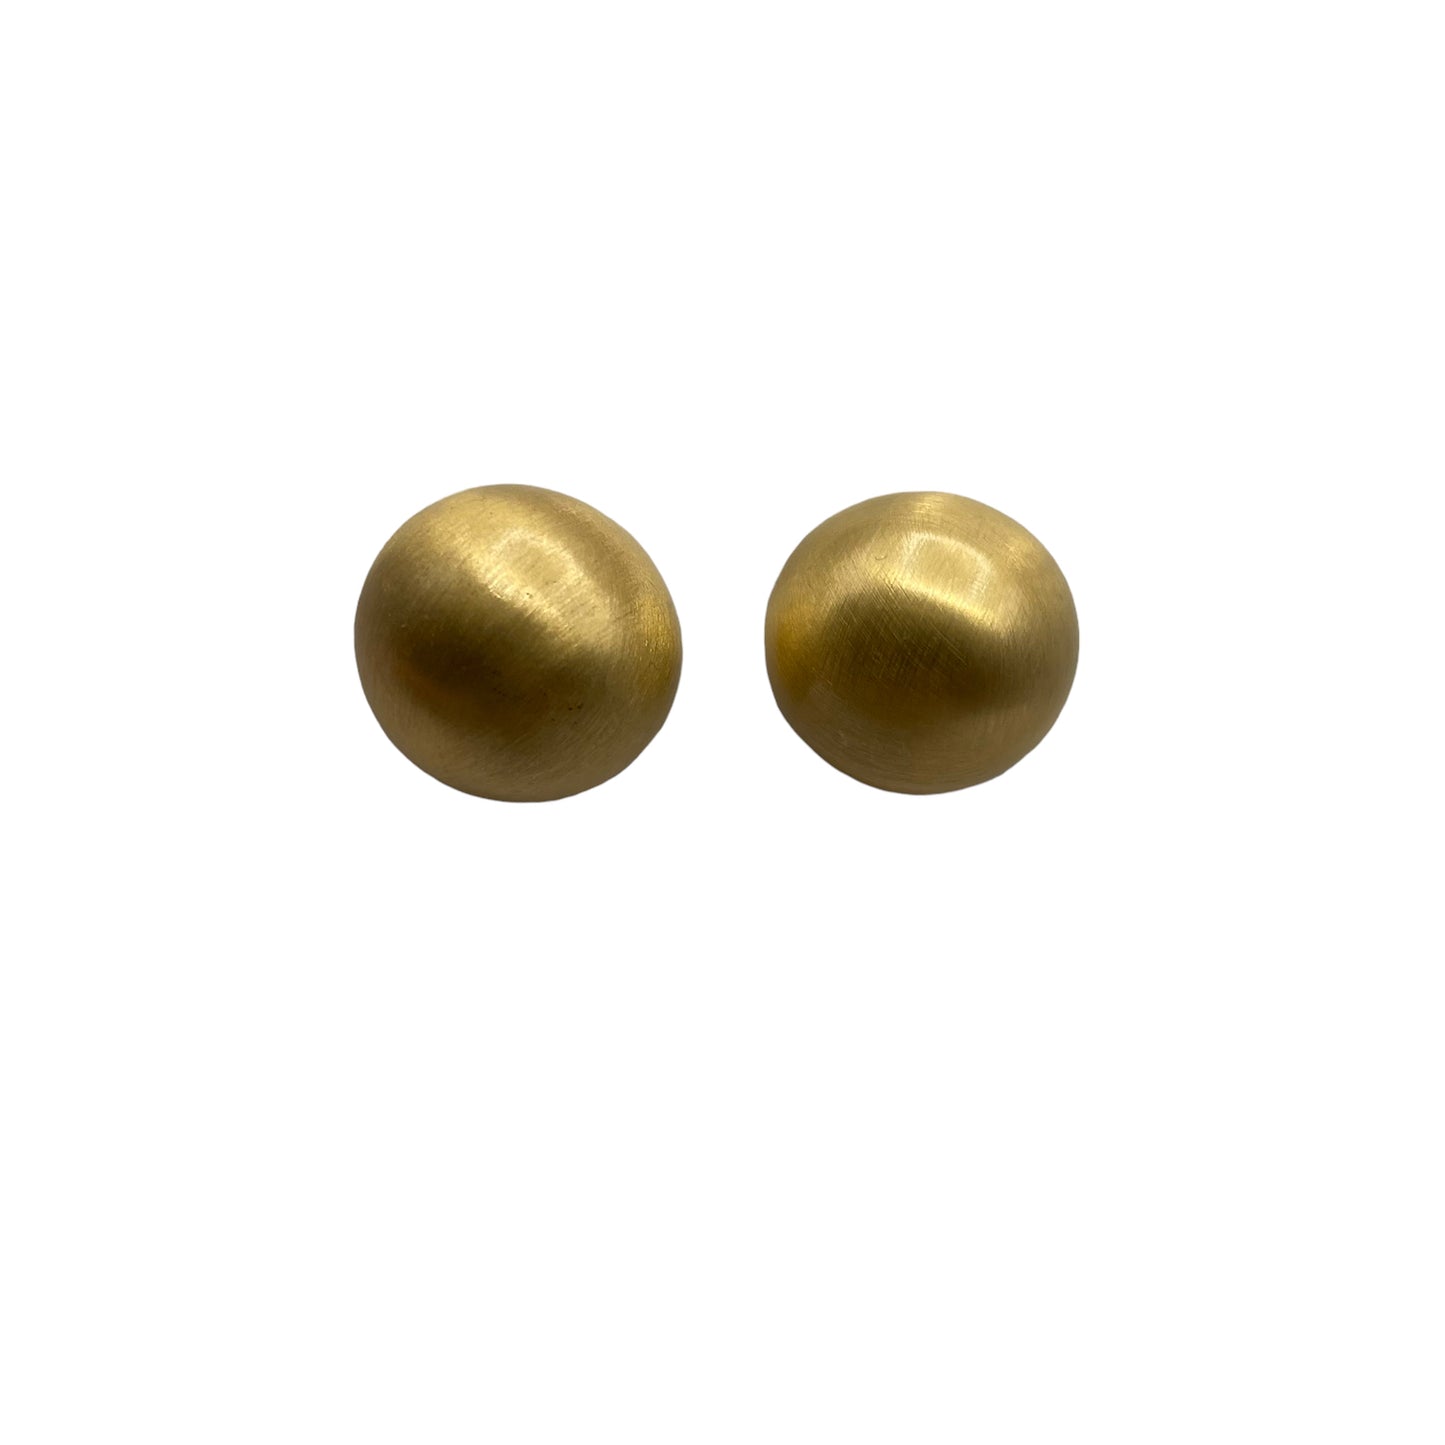 Brushed gold dome earrings